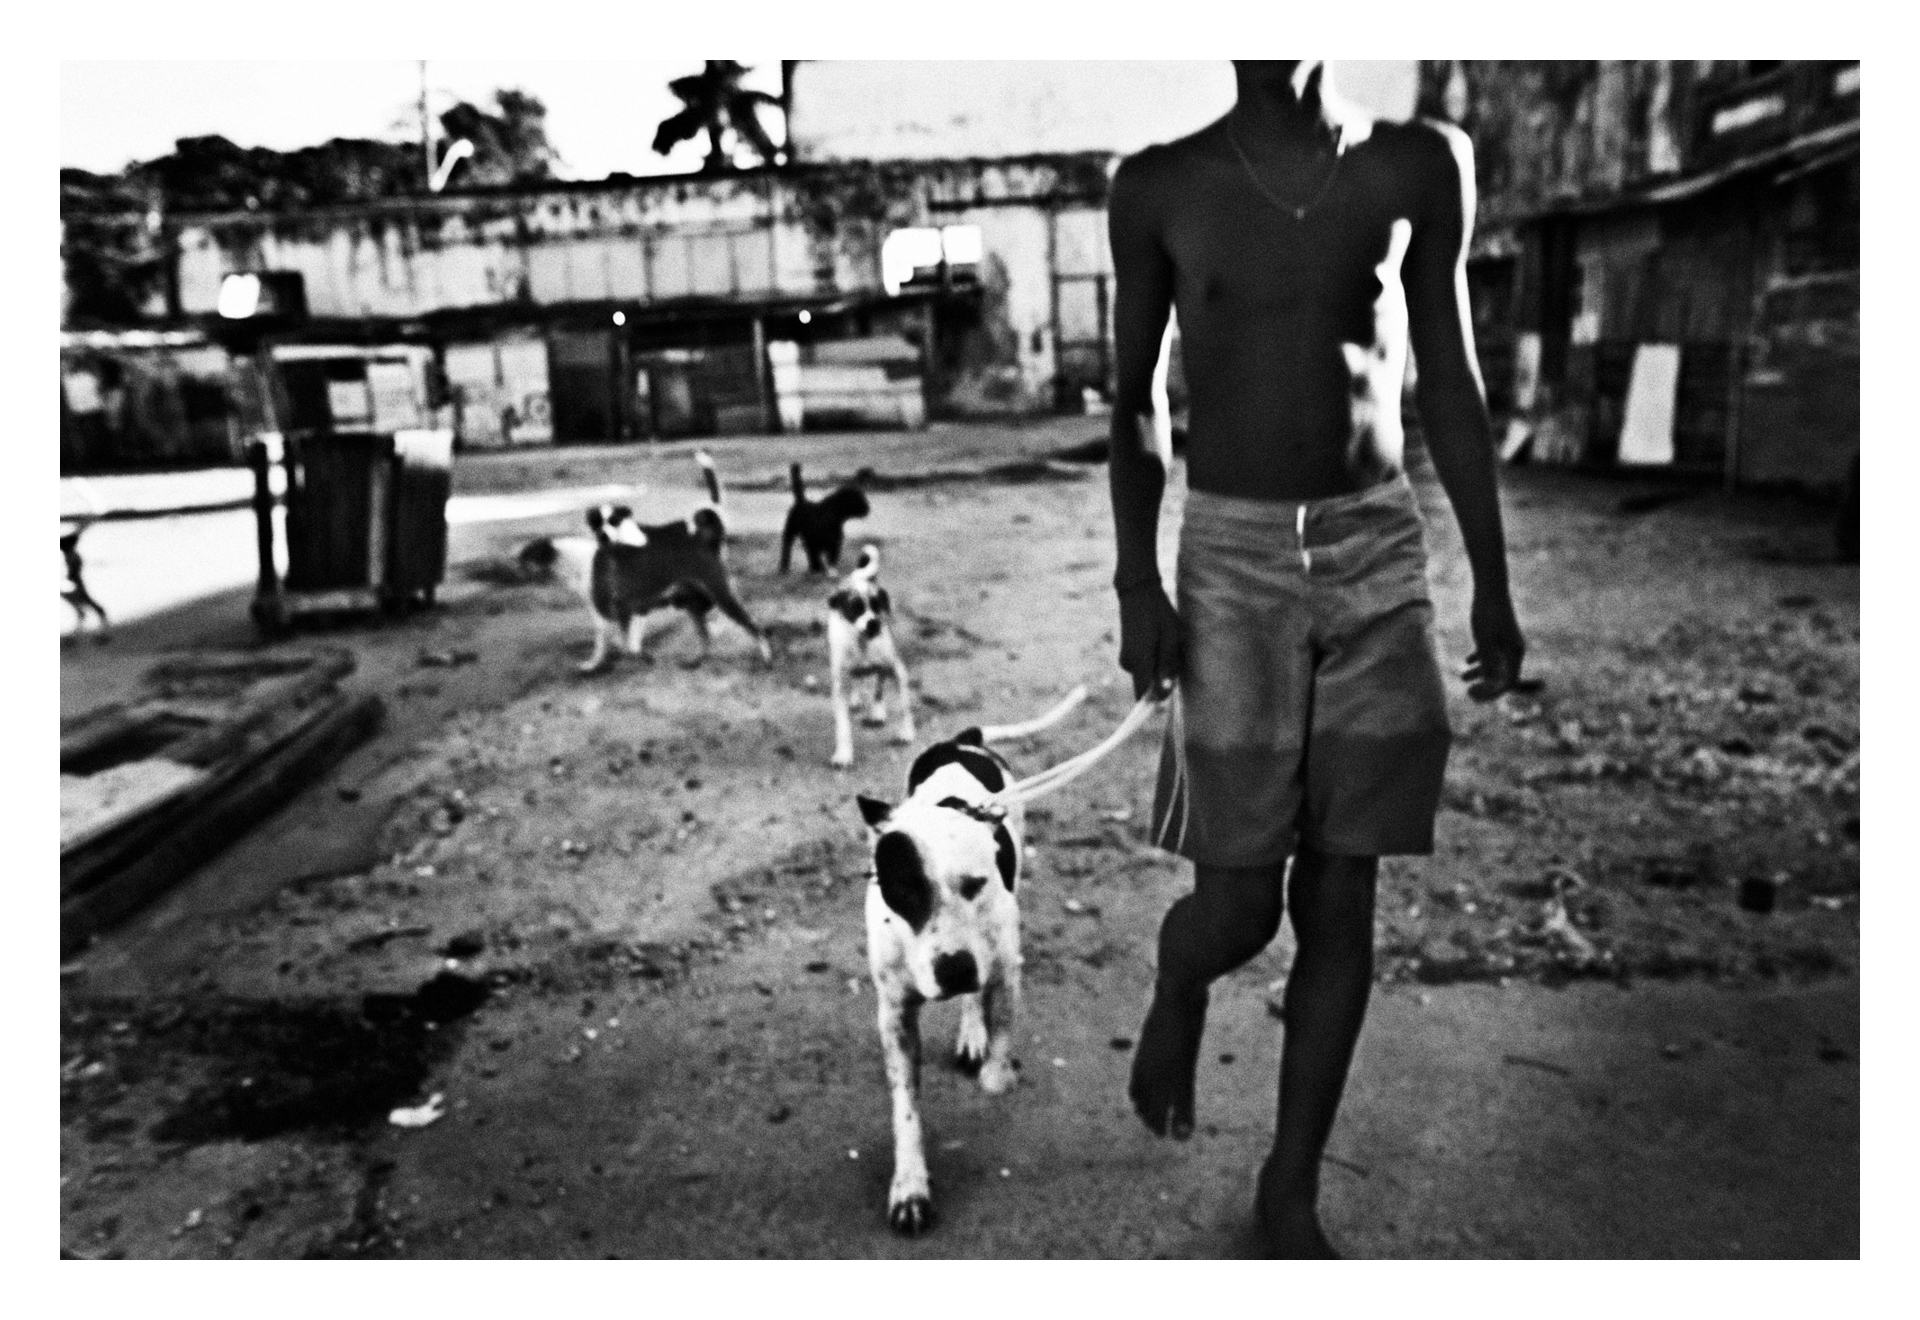  SALVADOR DE BAHIA, BRAZIL ? DECEMBER 10, 2009: A boy with a fighting dog in the courtyard of the factory before start the fight, on December 10, 2009 in Salvador de Bahia, Brazil. Despite the lack of socio-economic support from the government, they 